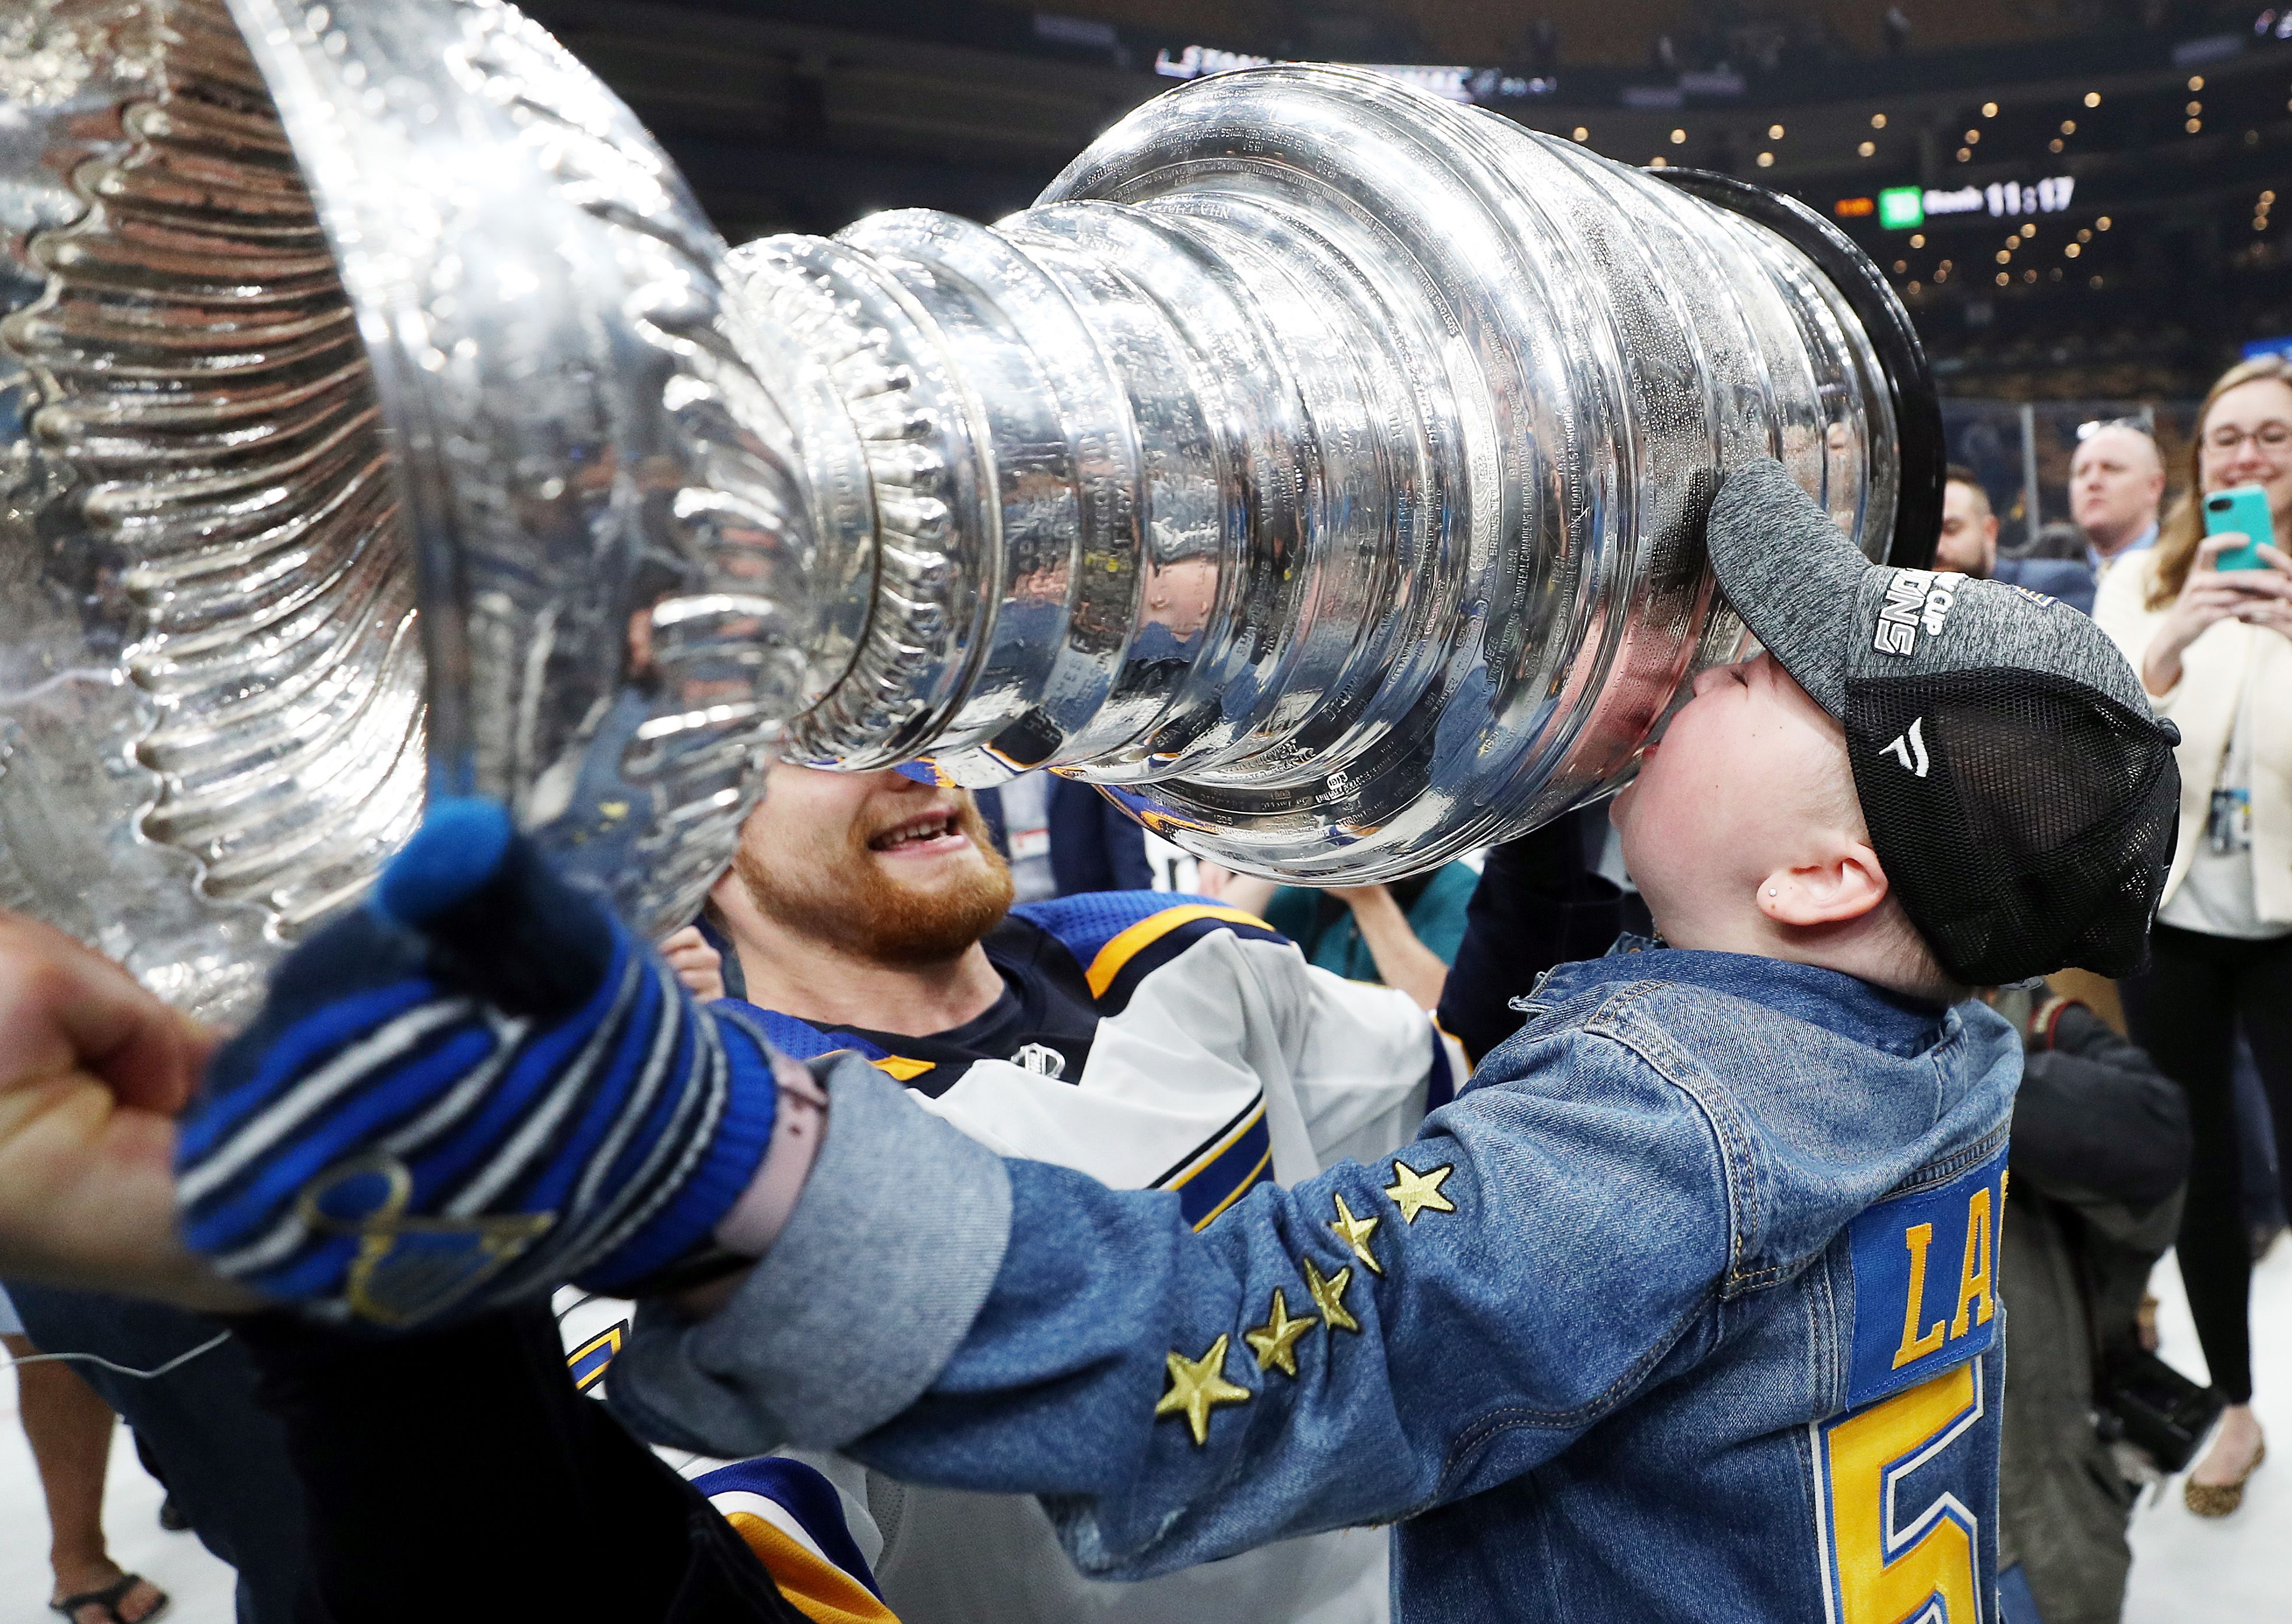 St. Louis Blues: Why The Stanley Cup Means So Much To Us